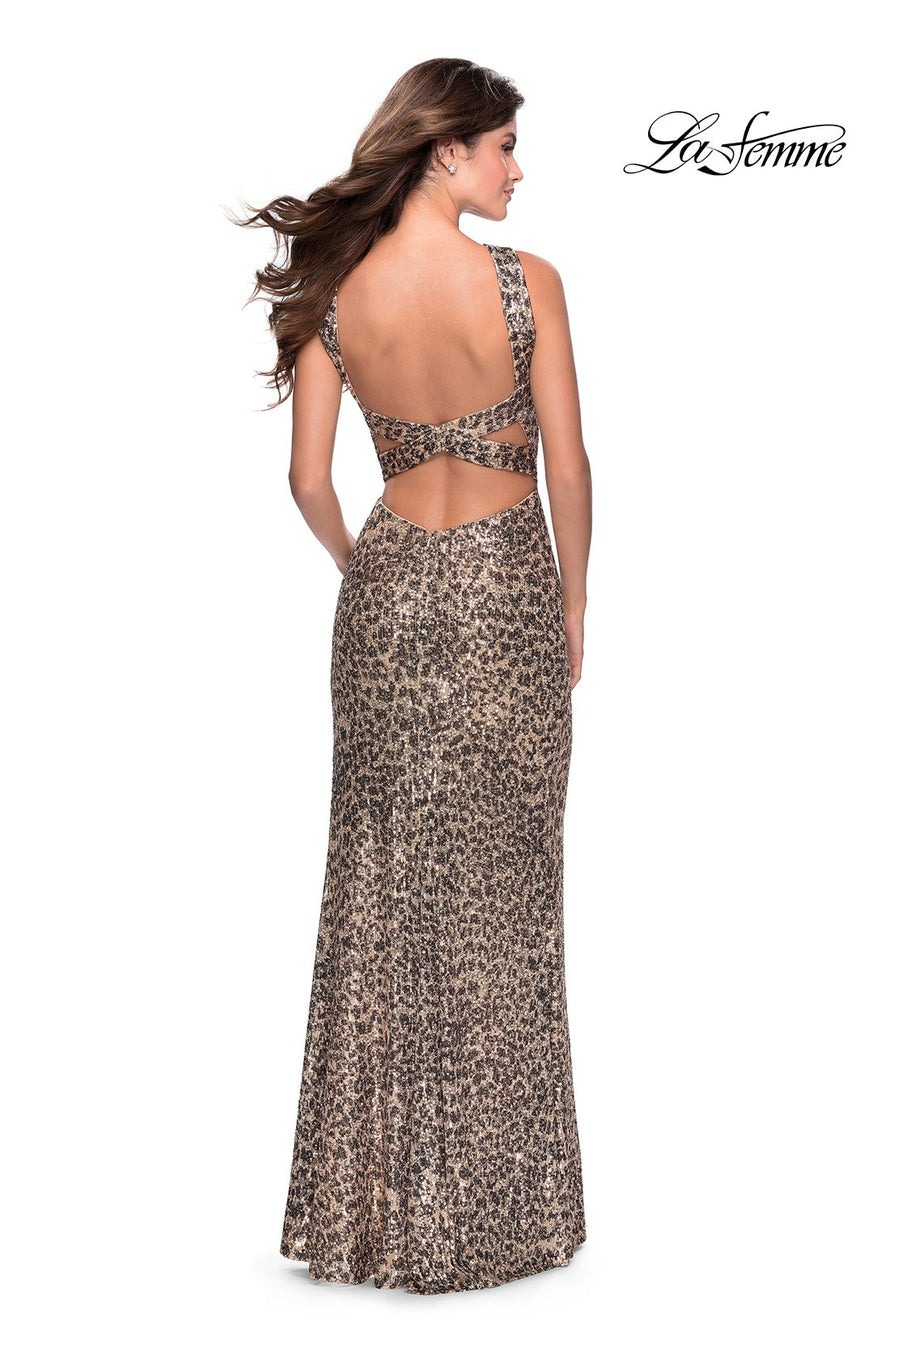 La Femme 31367 So Sweet Boutique Orlando Prom Dresses, A Top 10 Prom Dress  Shop in the US